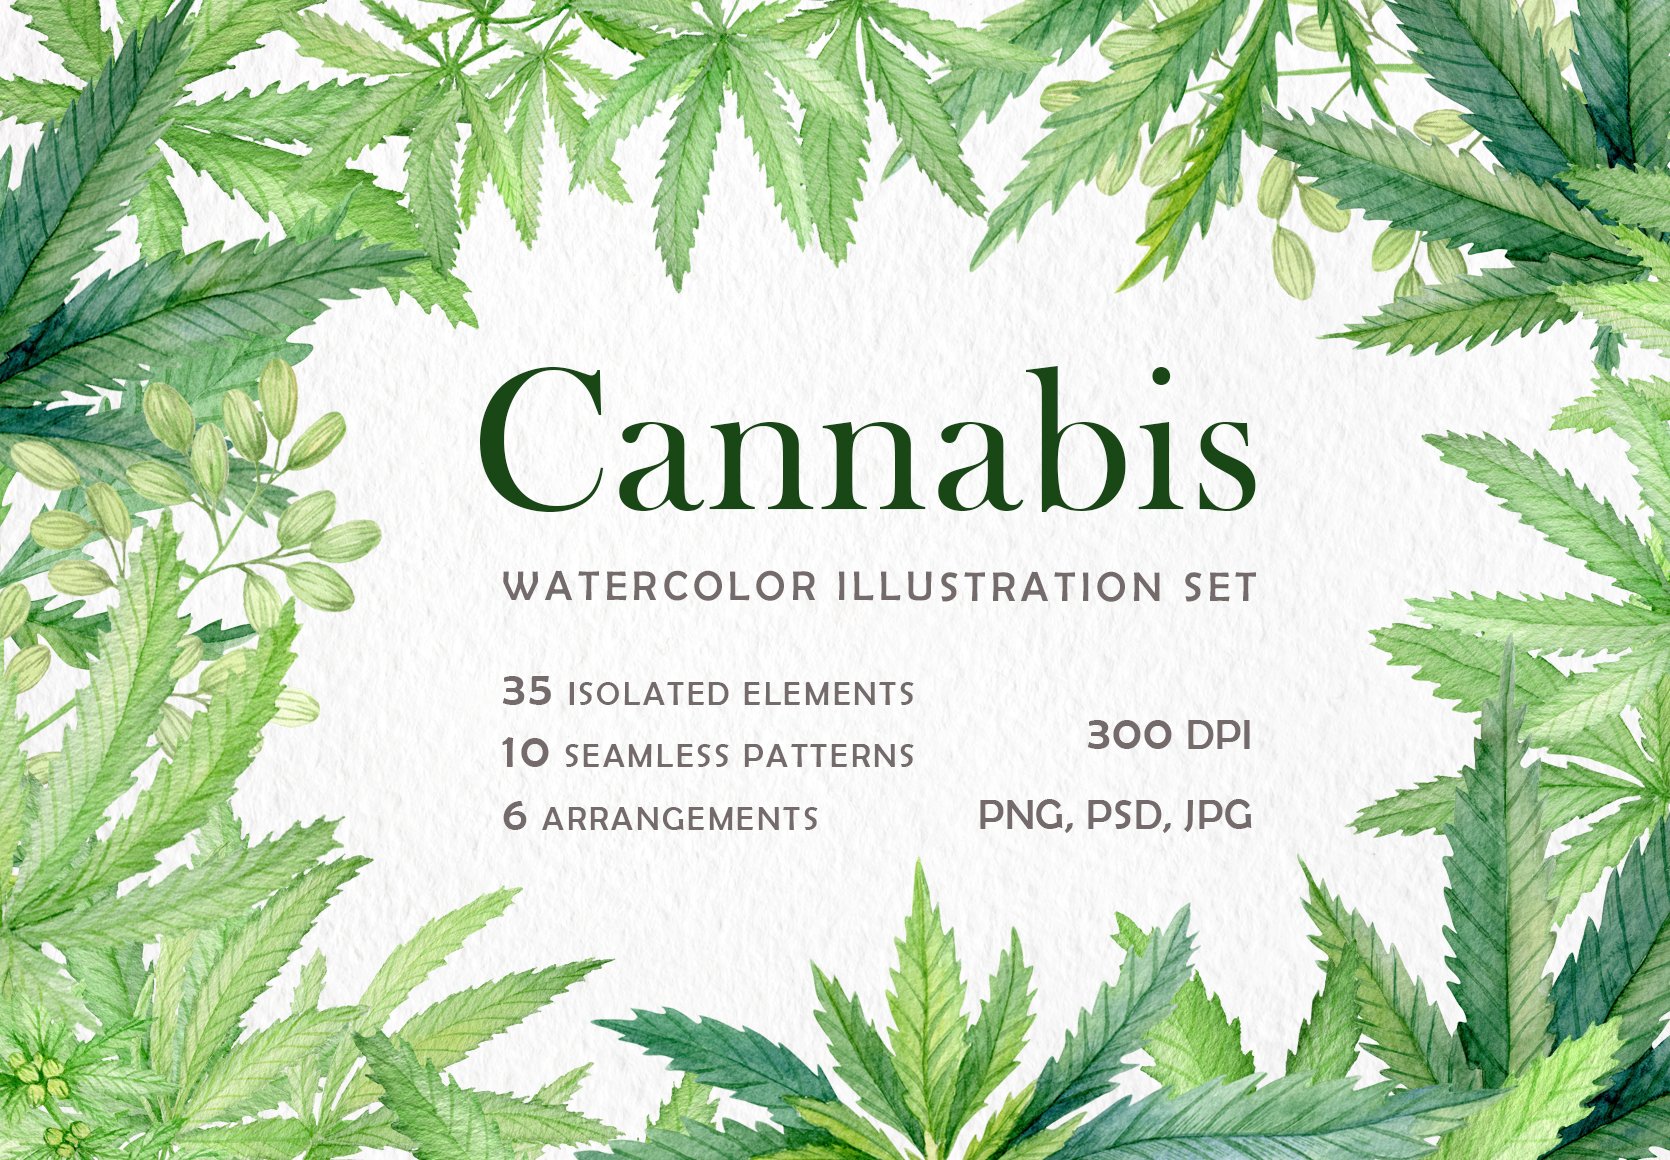 Cannabis watercolor set cover image.